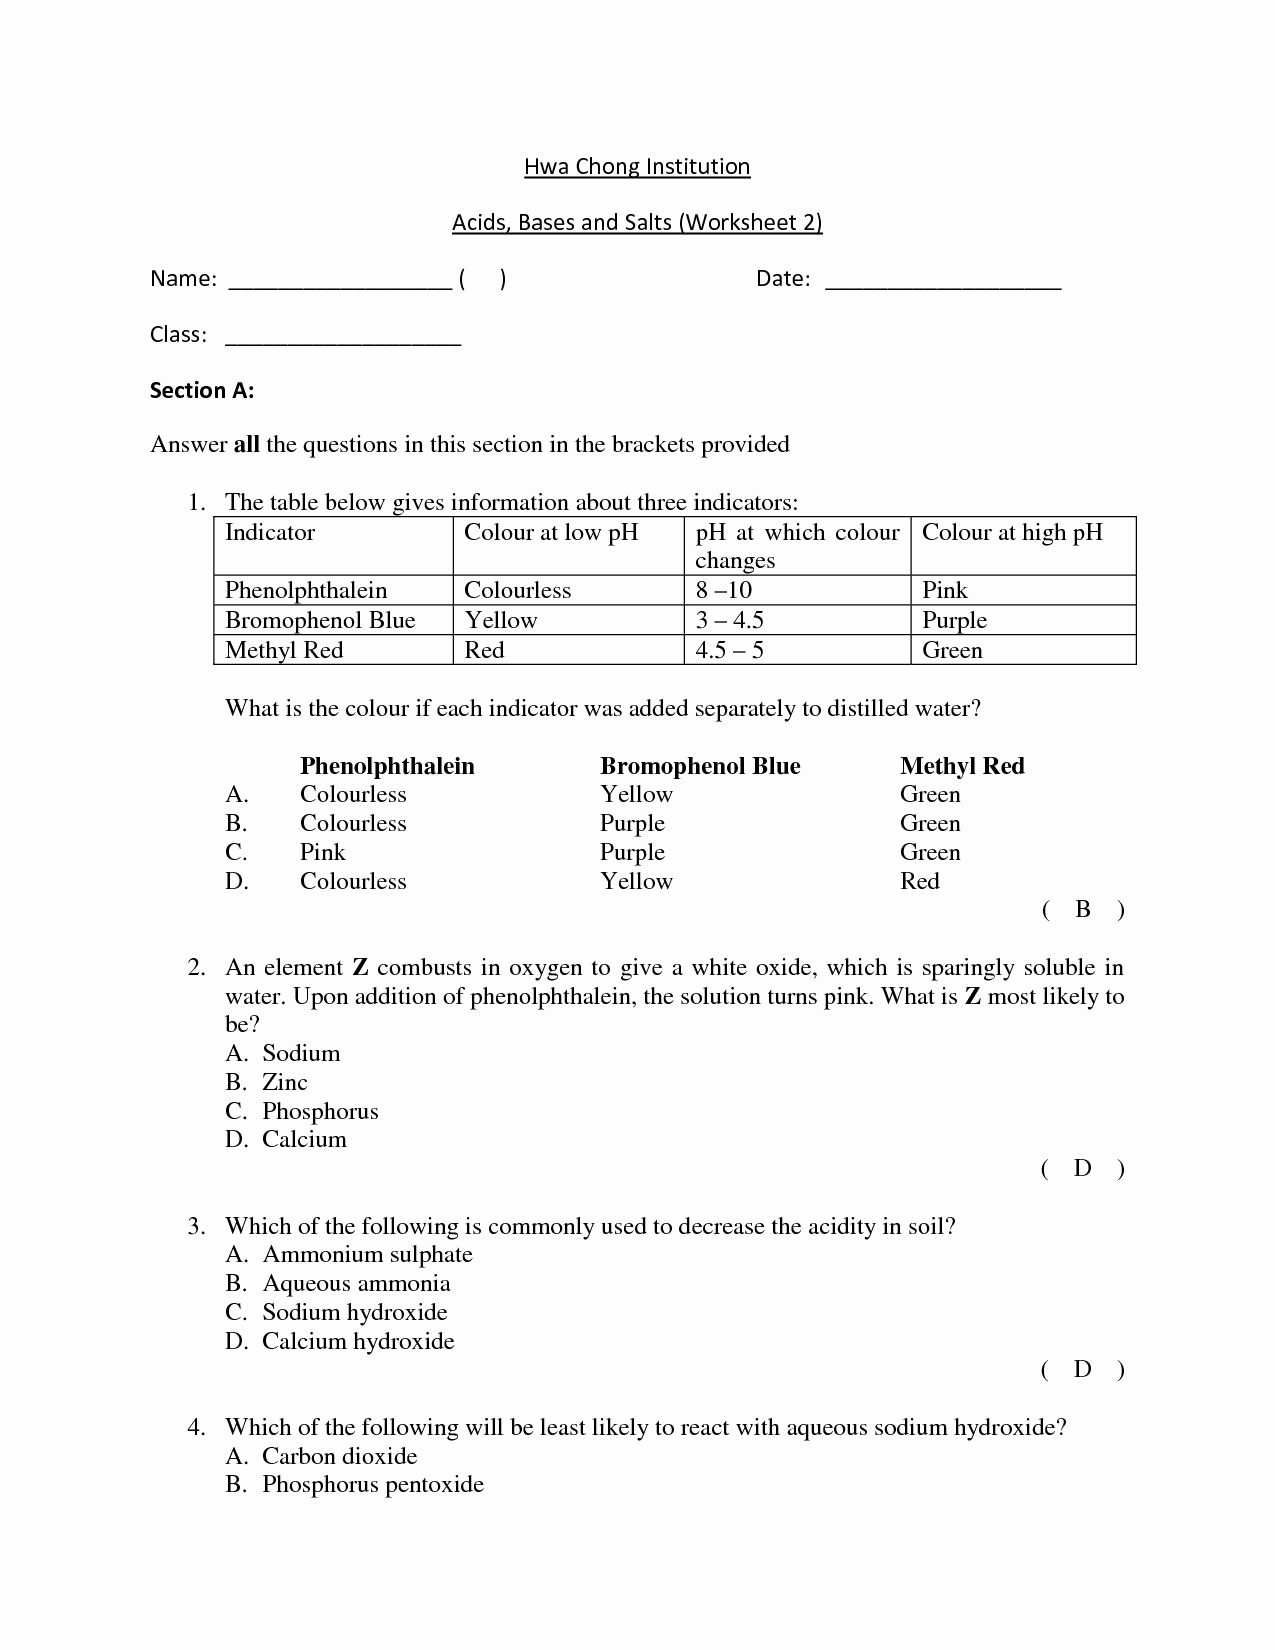 Acid and Bases Worksheet Answers Beautiful 12 Best Of Acid Rain and Ph Worksheet Answers